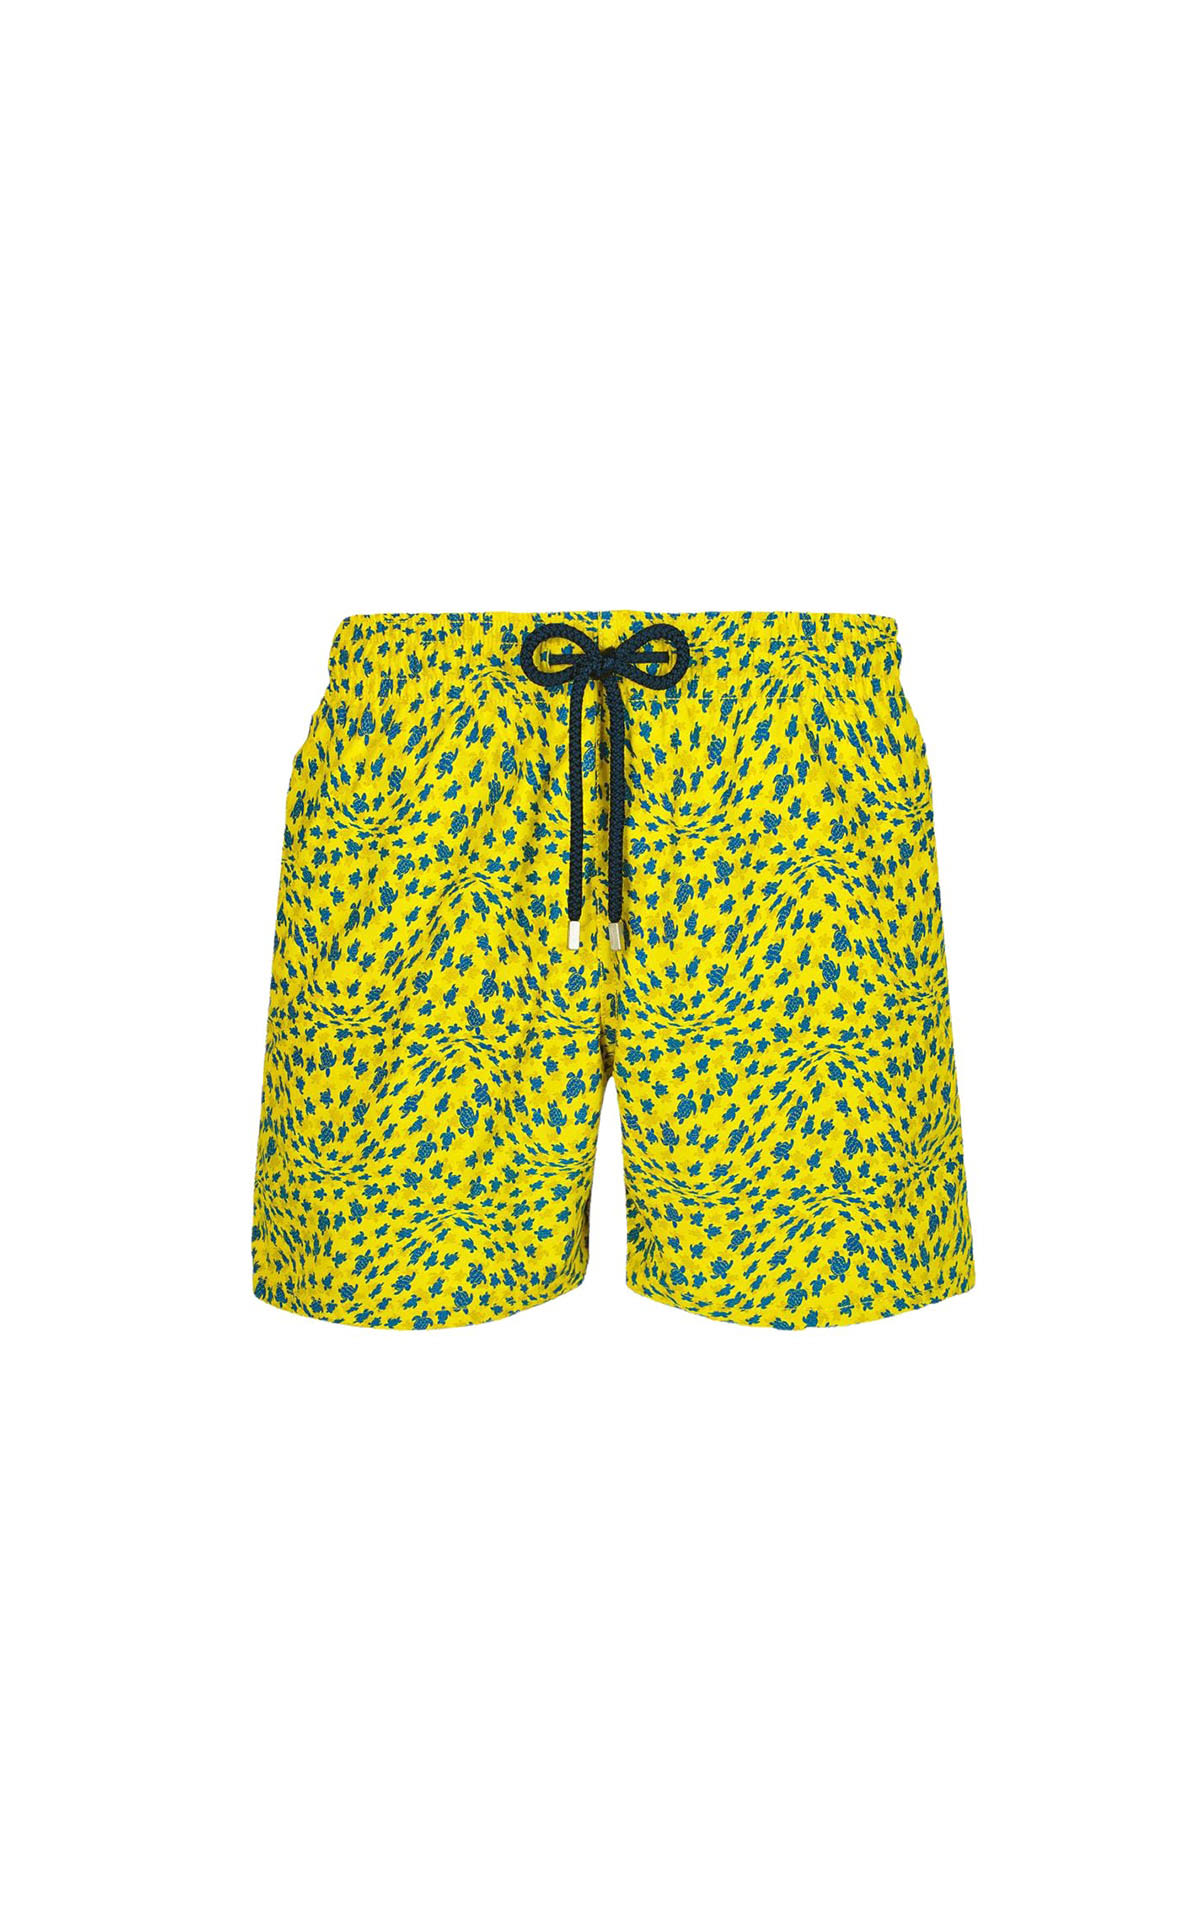 Men's swimsuit with yellow pattern